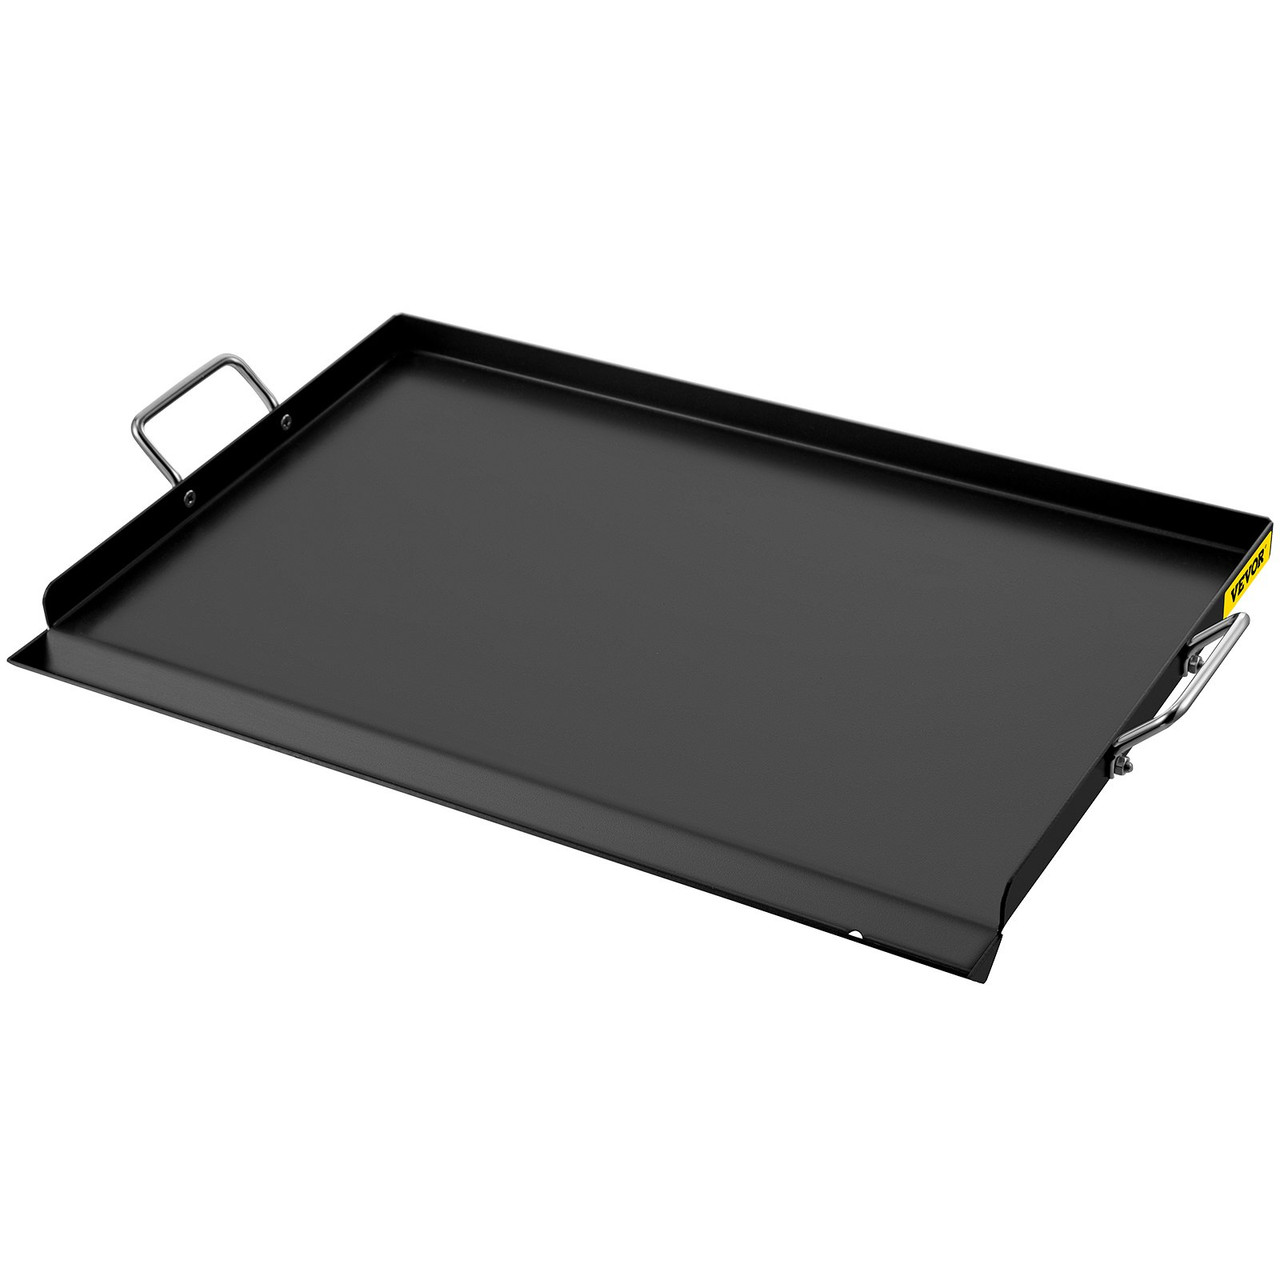 Carbon Steel Griddle, 16" x 37" Griddle Flat Top Plate, Griddle for BBQ Charcoal/Gas Gril with 2 Handles, Rectangular Flat Top Grill with Extra Drain Hole for Tailgating and Parties